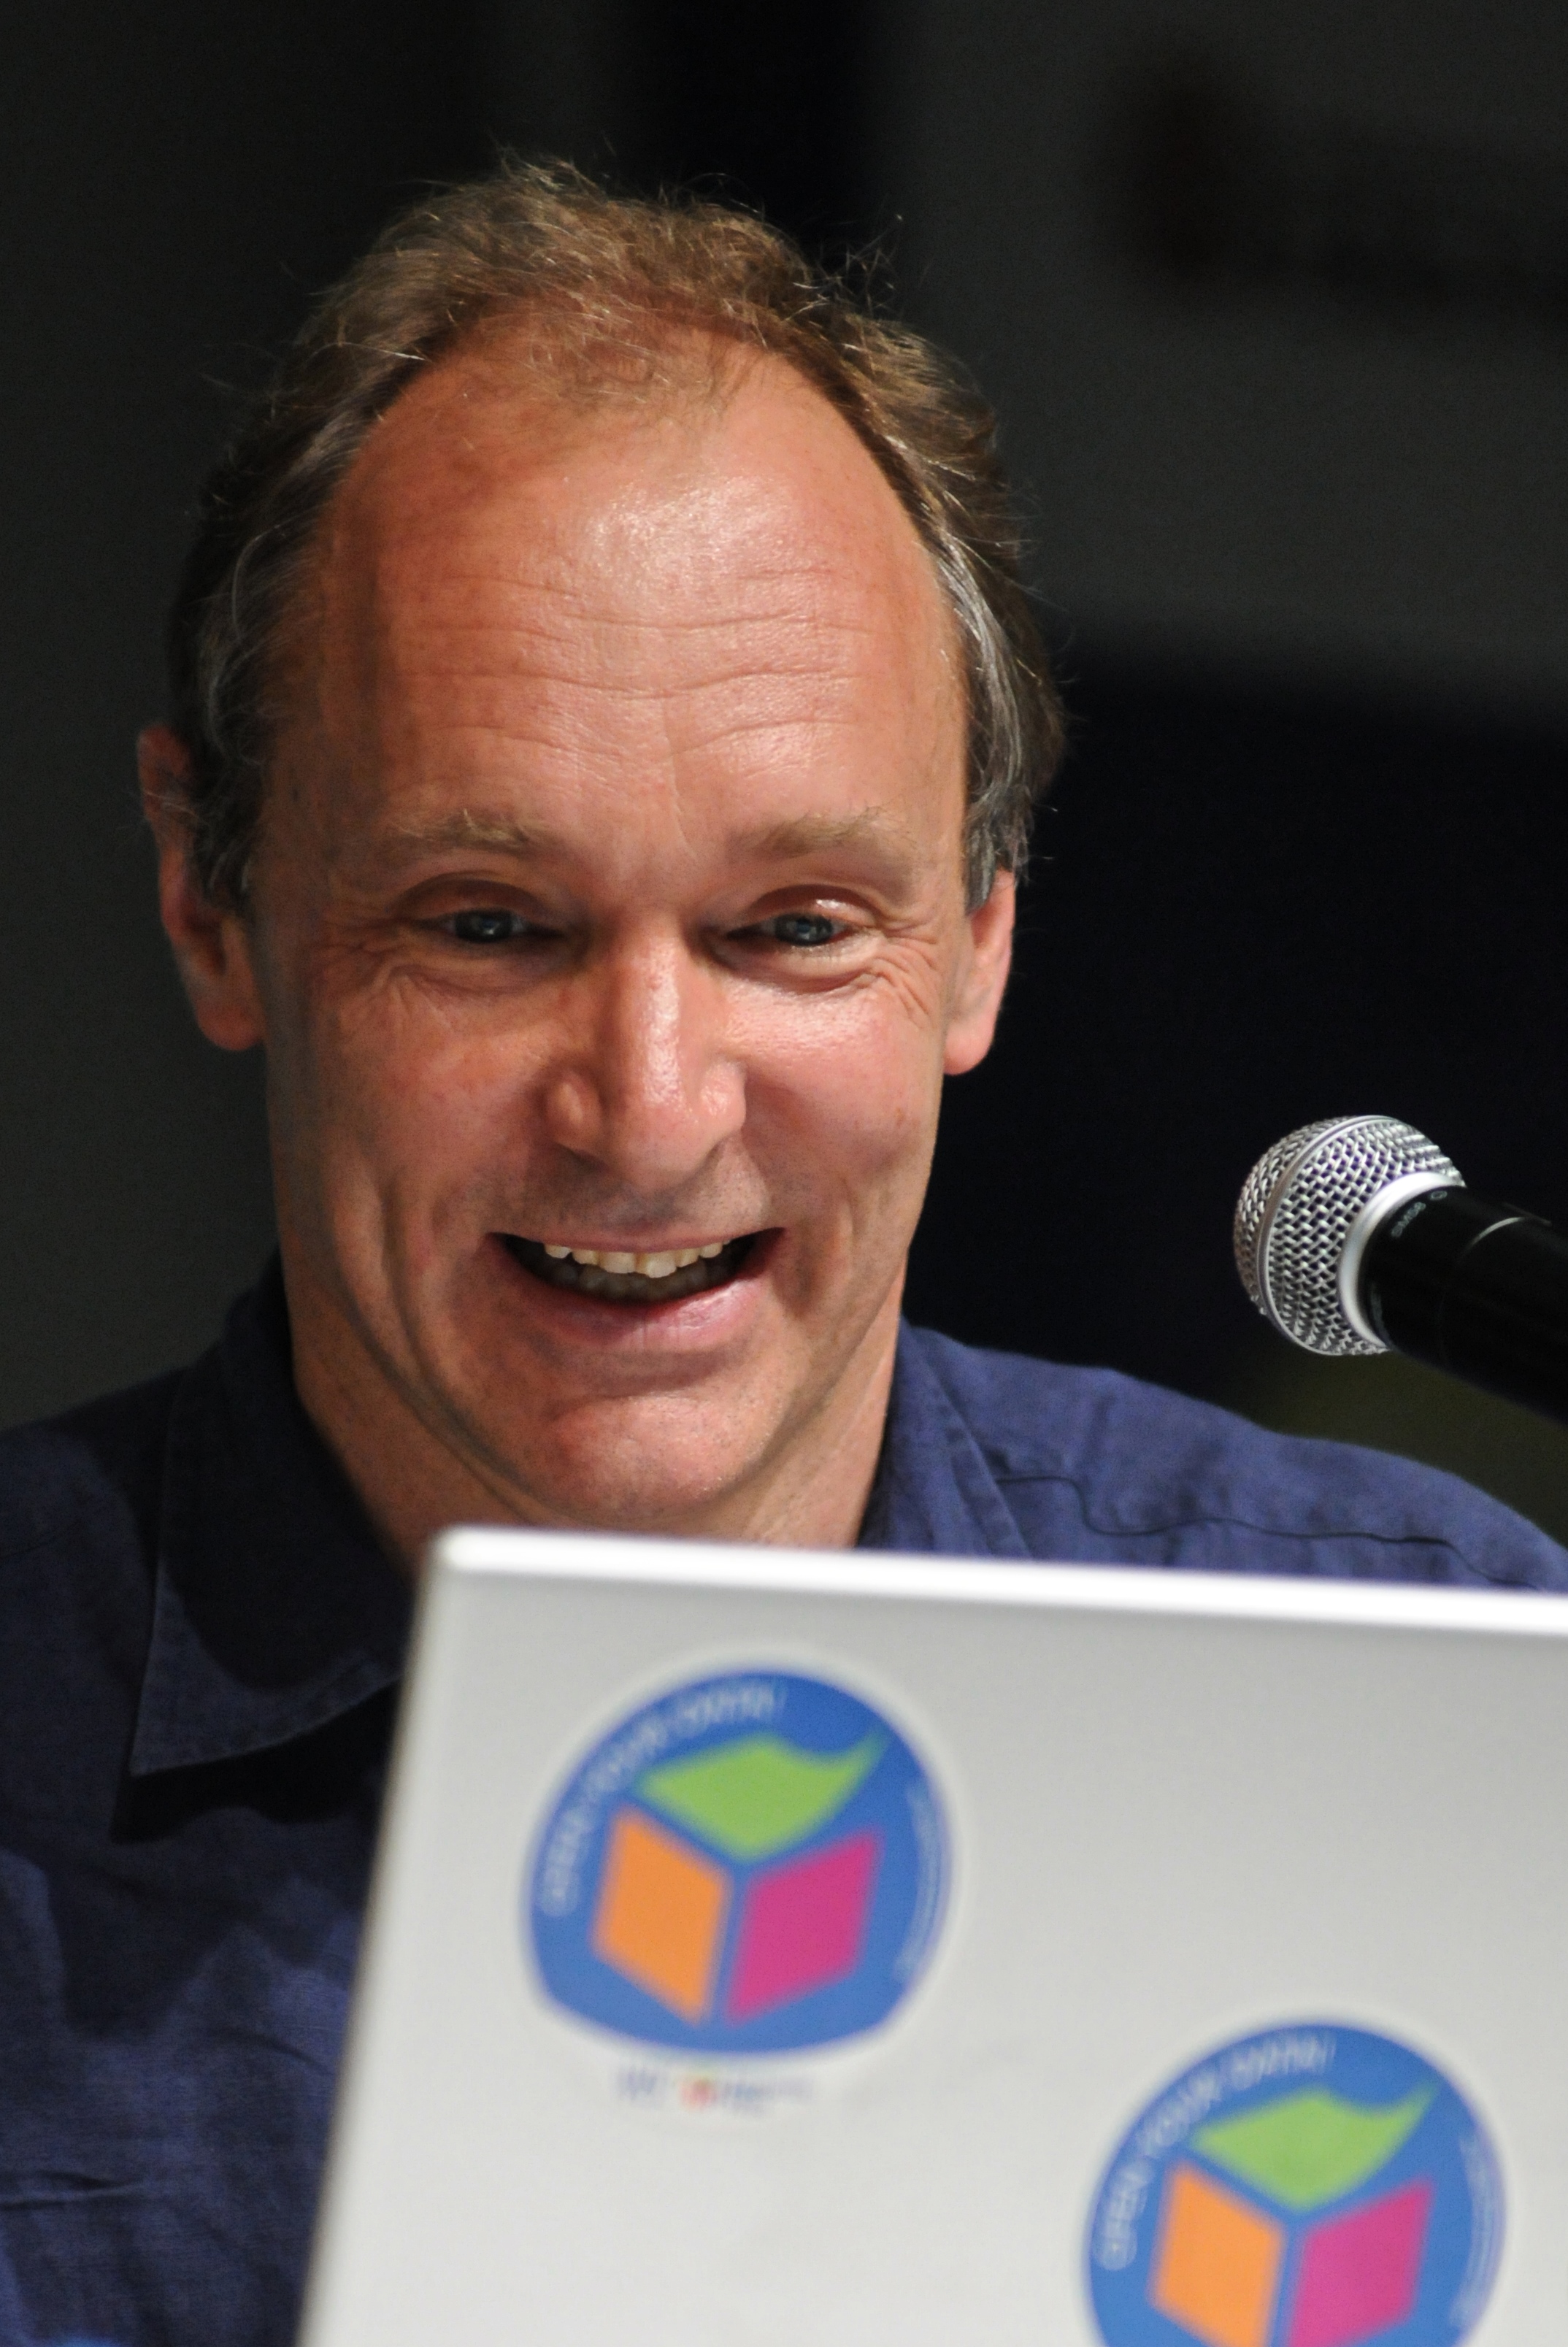 Tim Berners Lee, the inventor of the WWW